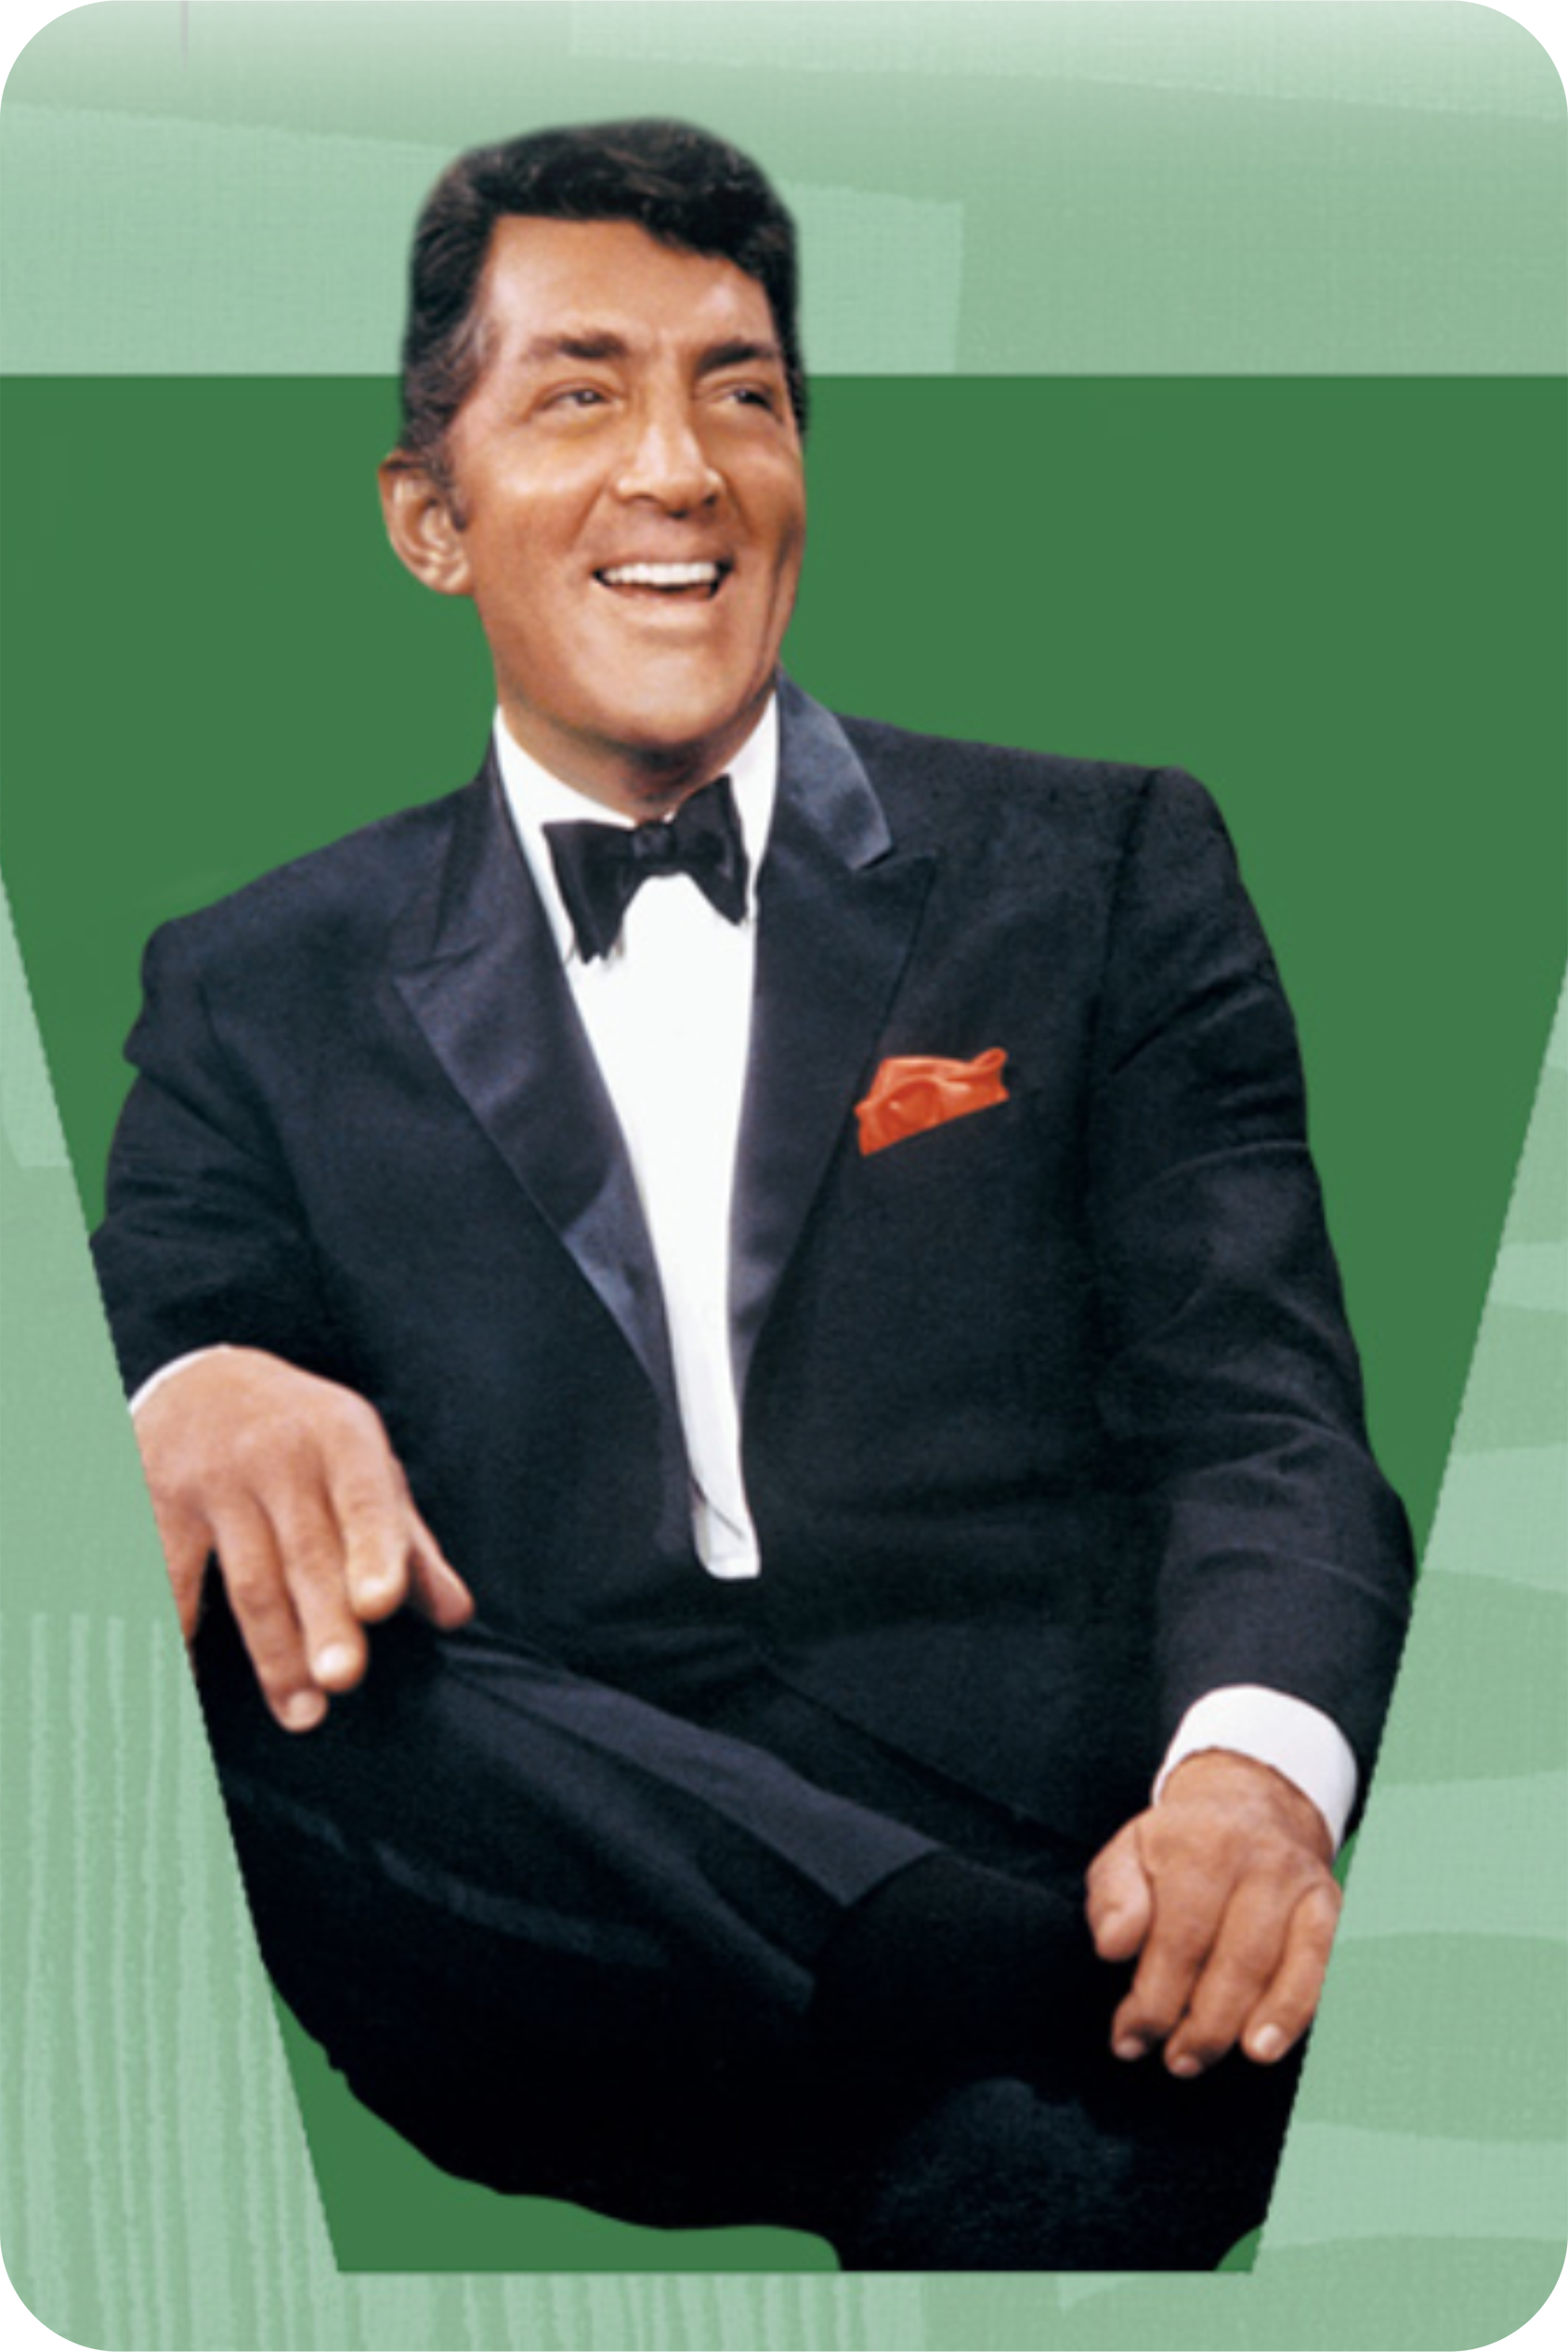 taille-dean-martin-Image